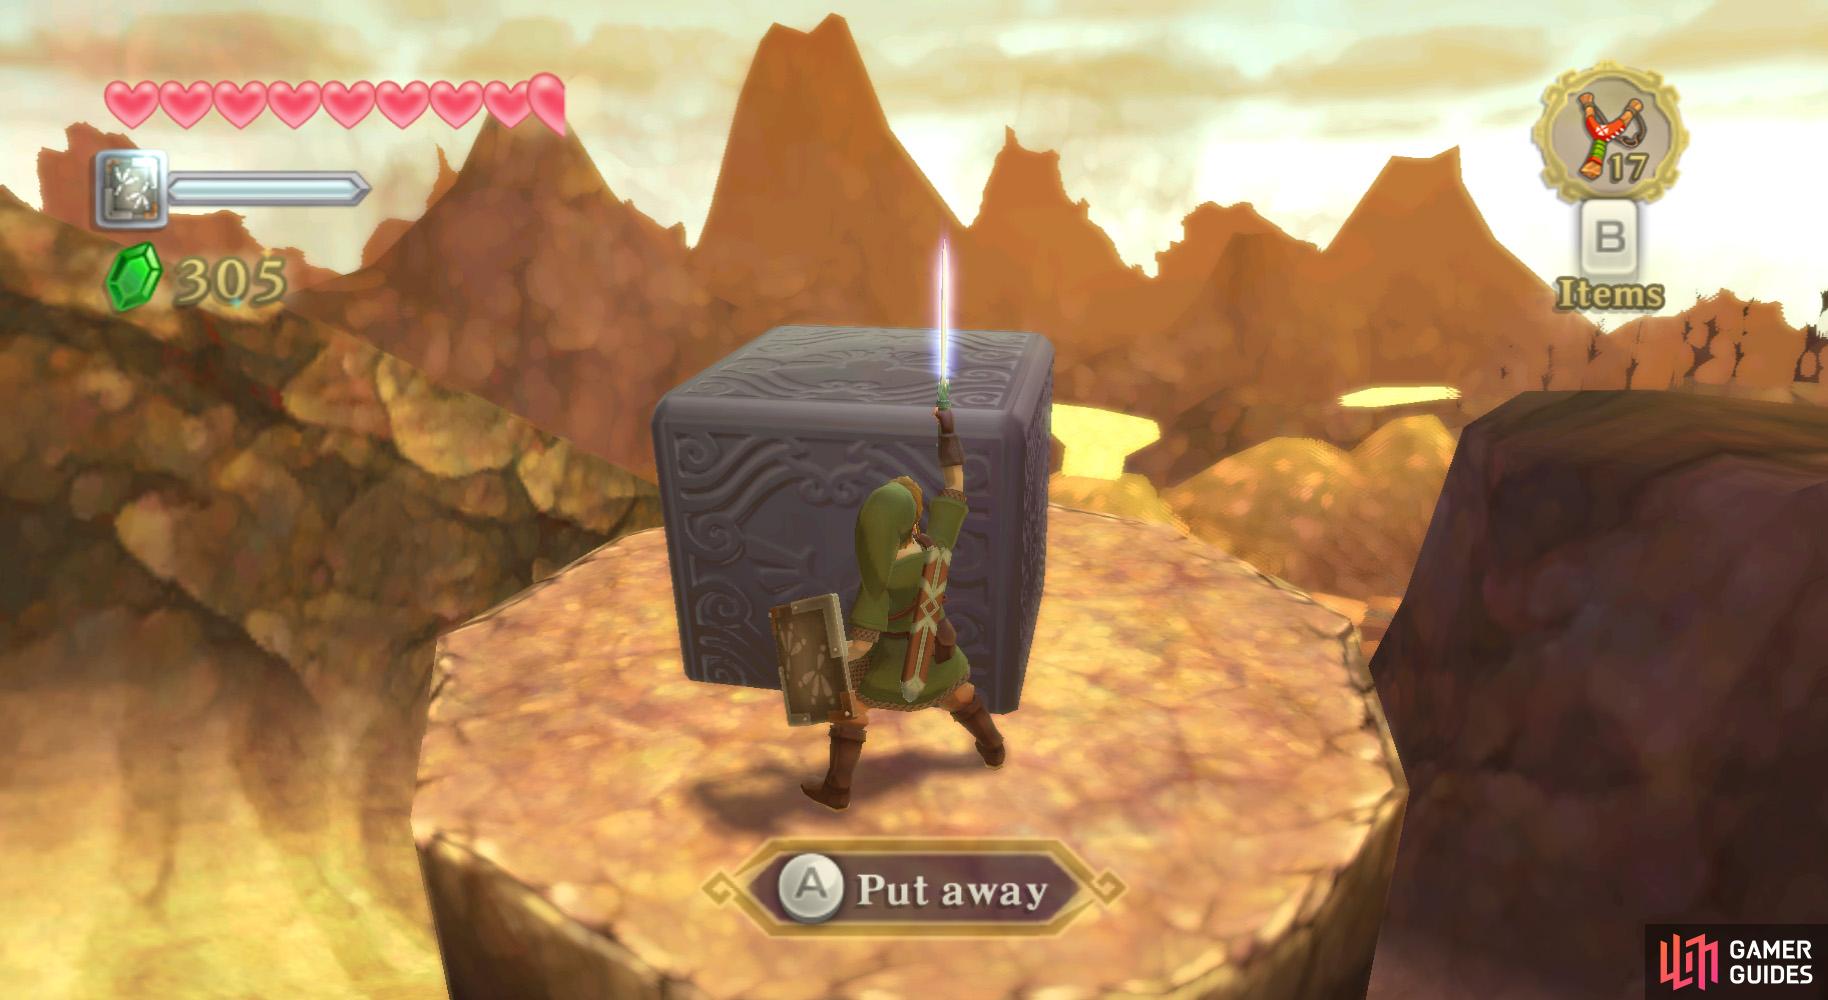 Goddess Cube: When you're outside on the massive slide, use the first air vent on the left. Then jump forward.